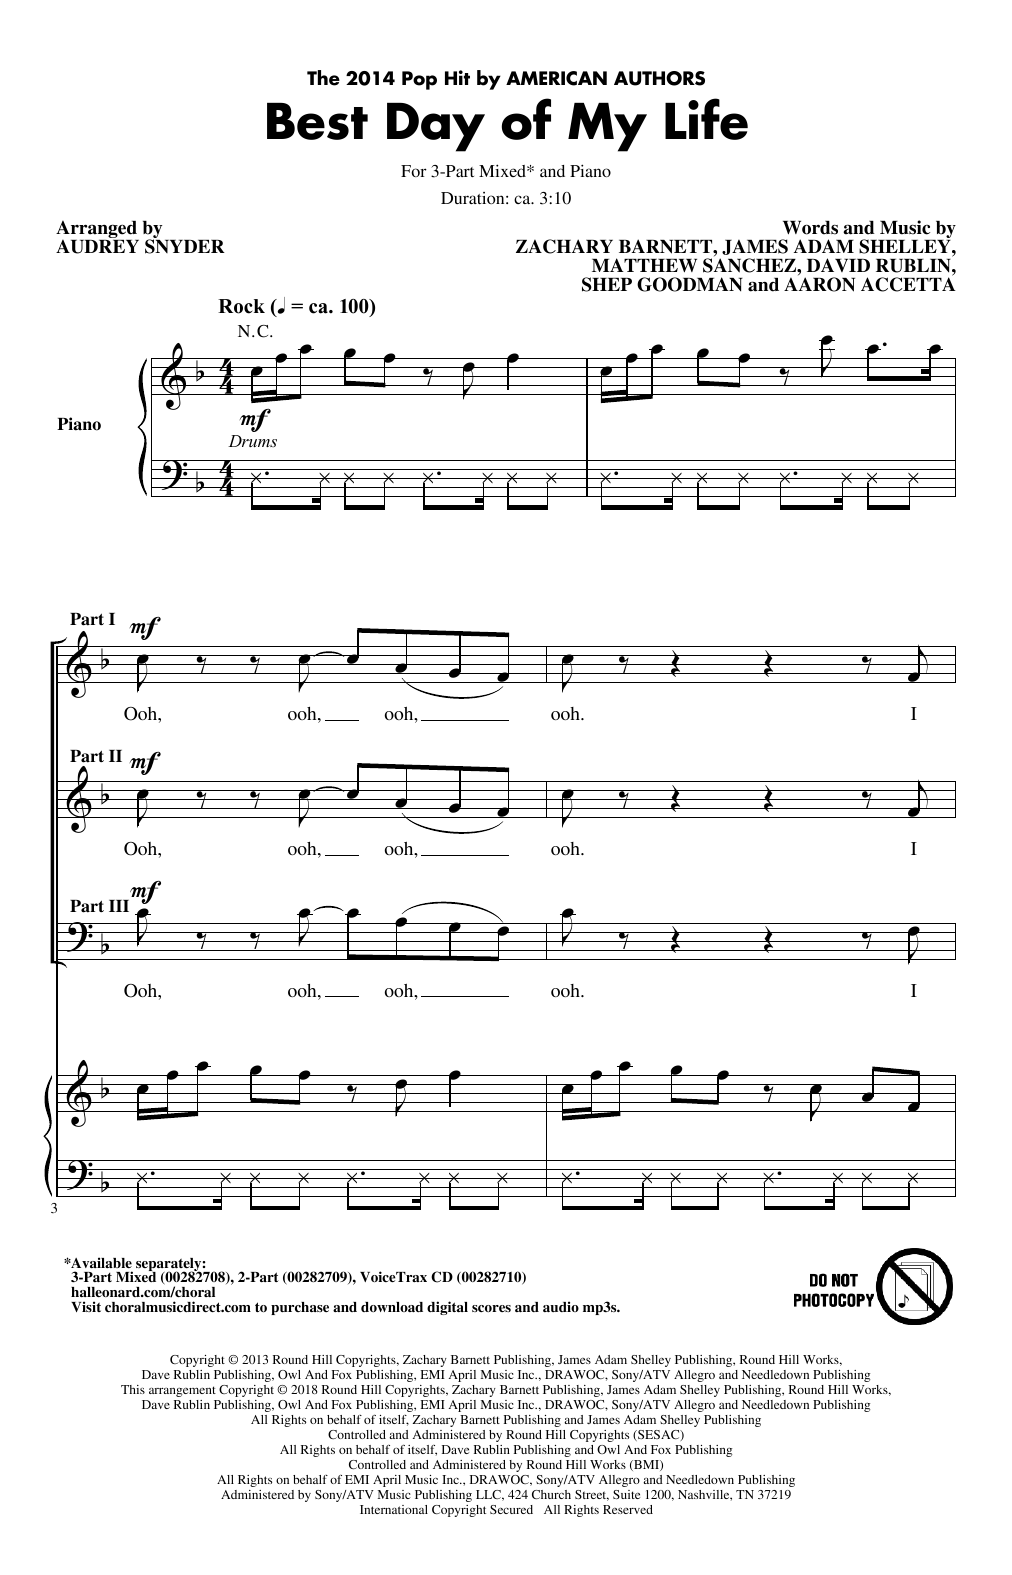 American Authors Best Day Of My Life (arr. Audrey Snyder) sheet music notes and chords. Download Printable PDF.